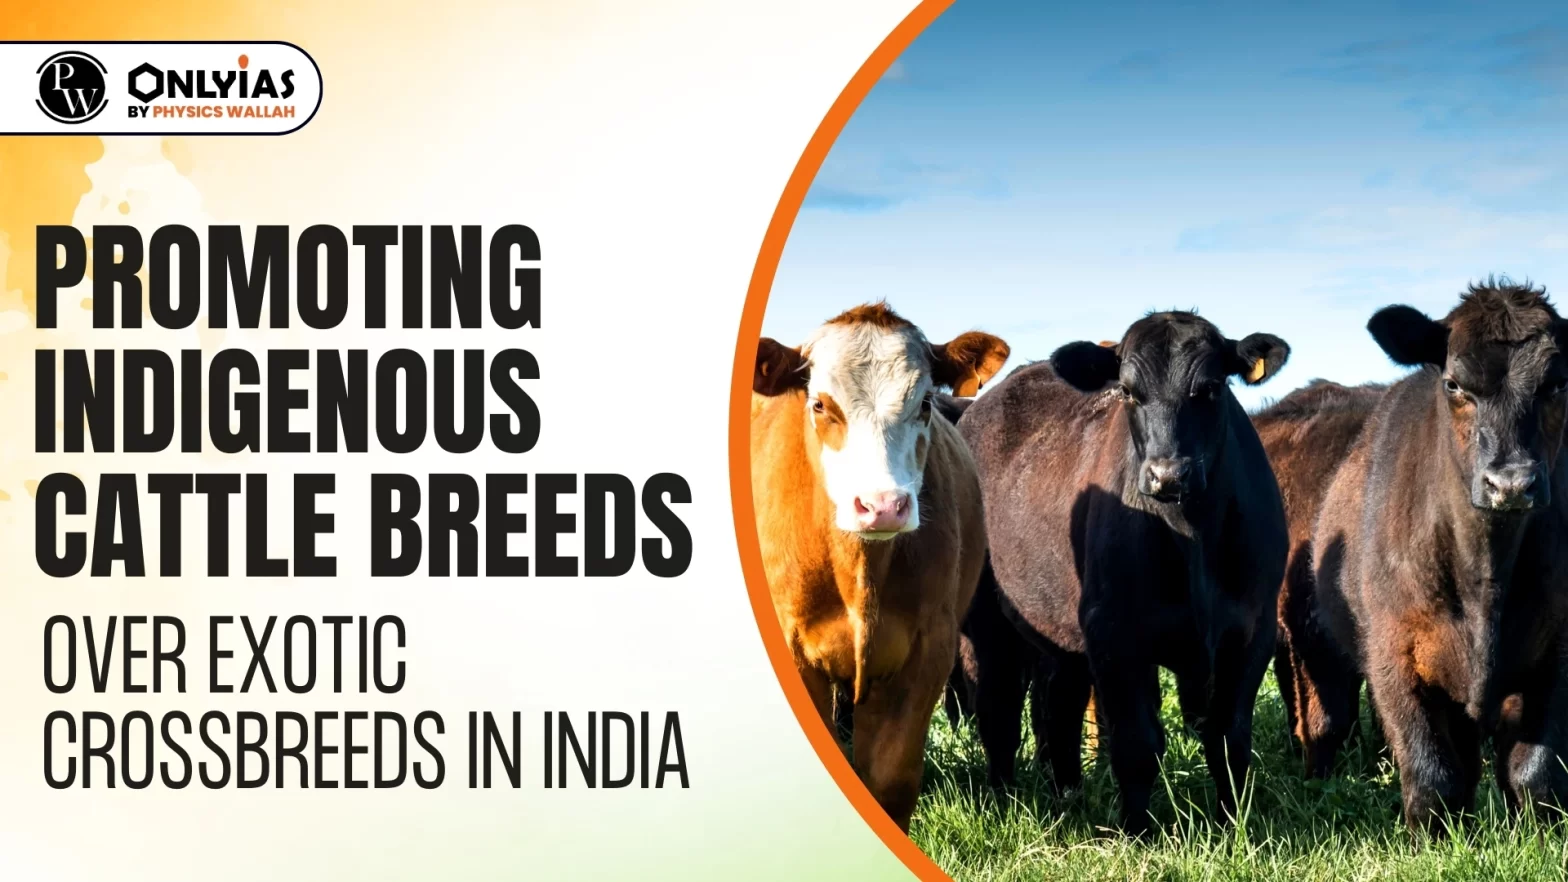 Promoting Indigenous Cattle Breeds Over Exotic Crossbreeds in India